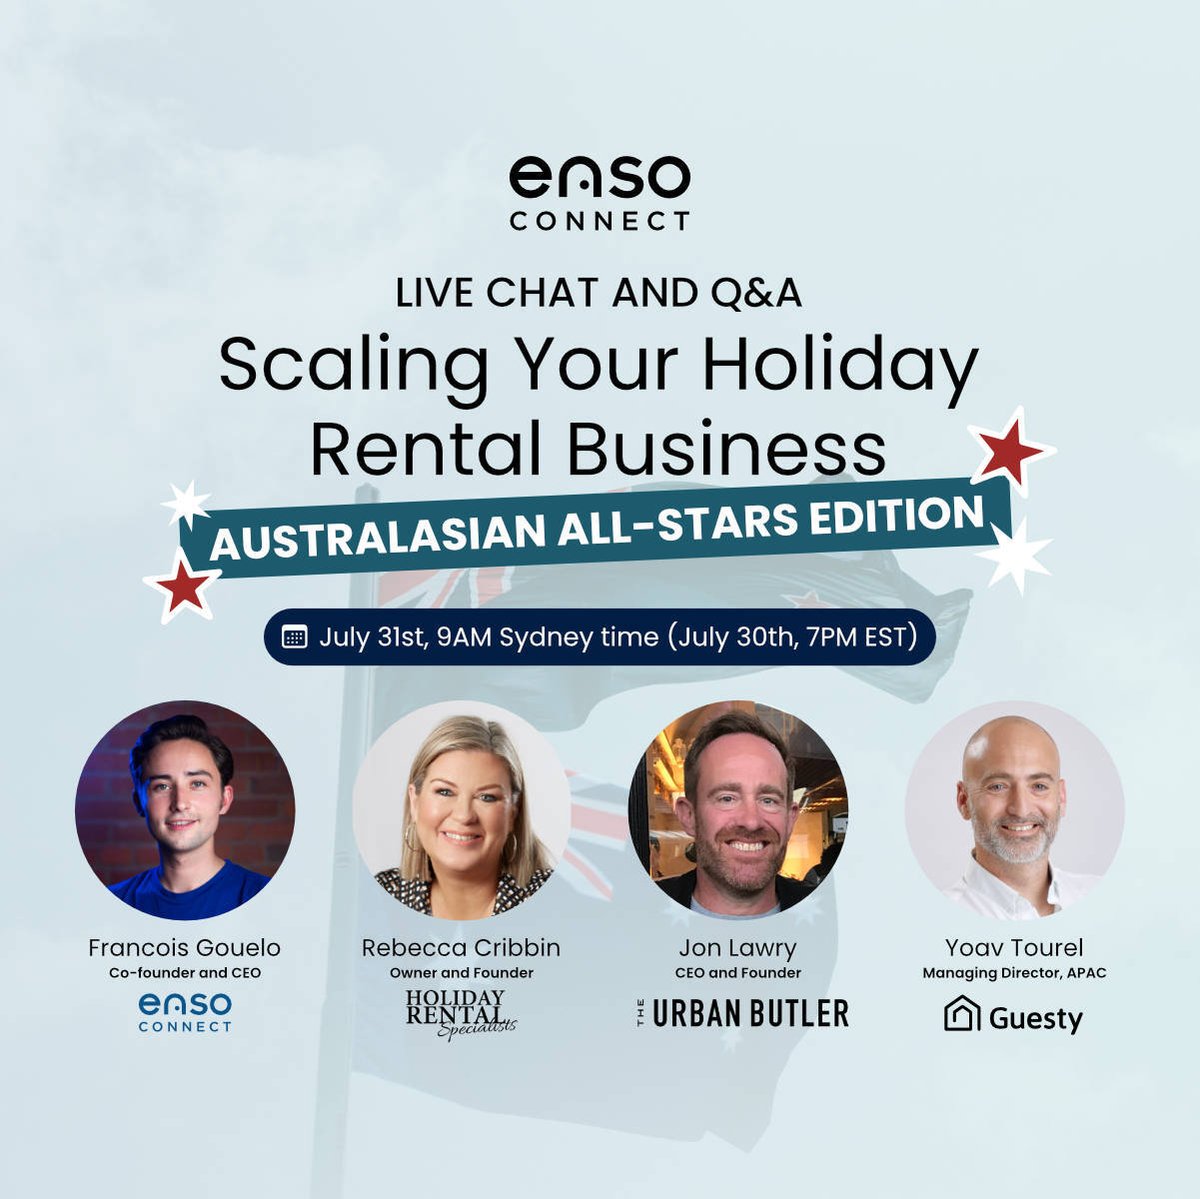 Calling all #HolidayRental pros in #Australia & #NewZealand looking to scale up🚀

Join us for a live chat and Q&A with top #HospitalityLeaders in the #STR #Australasian market. 

Register to get tips on growth, tackling challenges, leveraging tech, etc: hubs.ly/Q01YdC-90